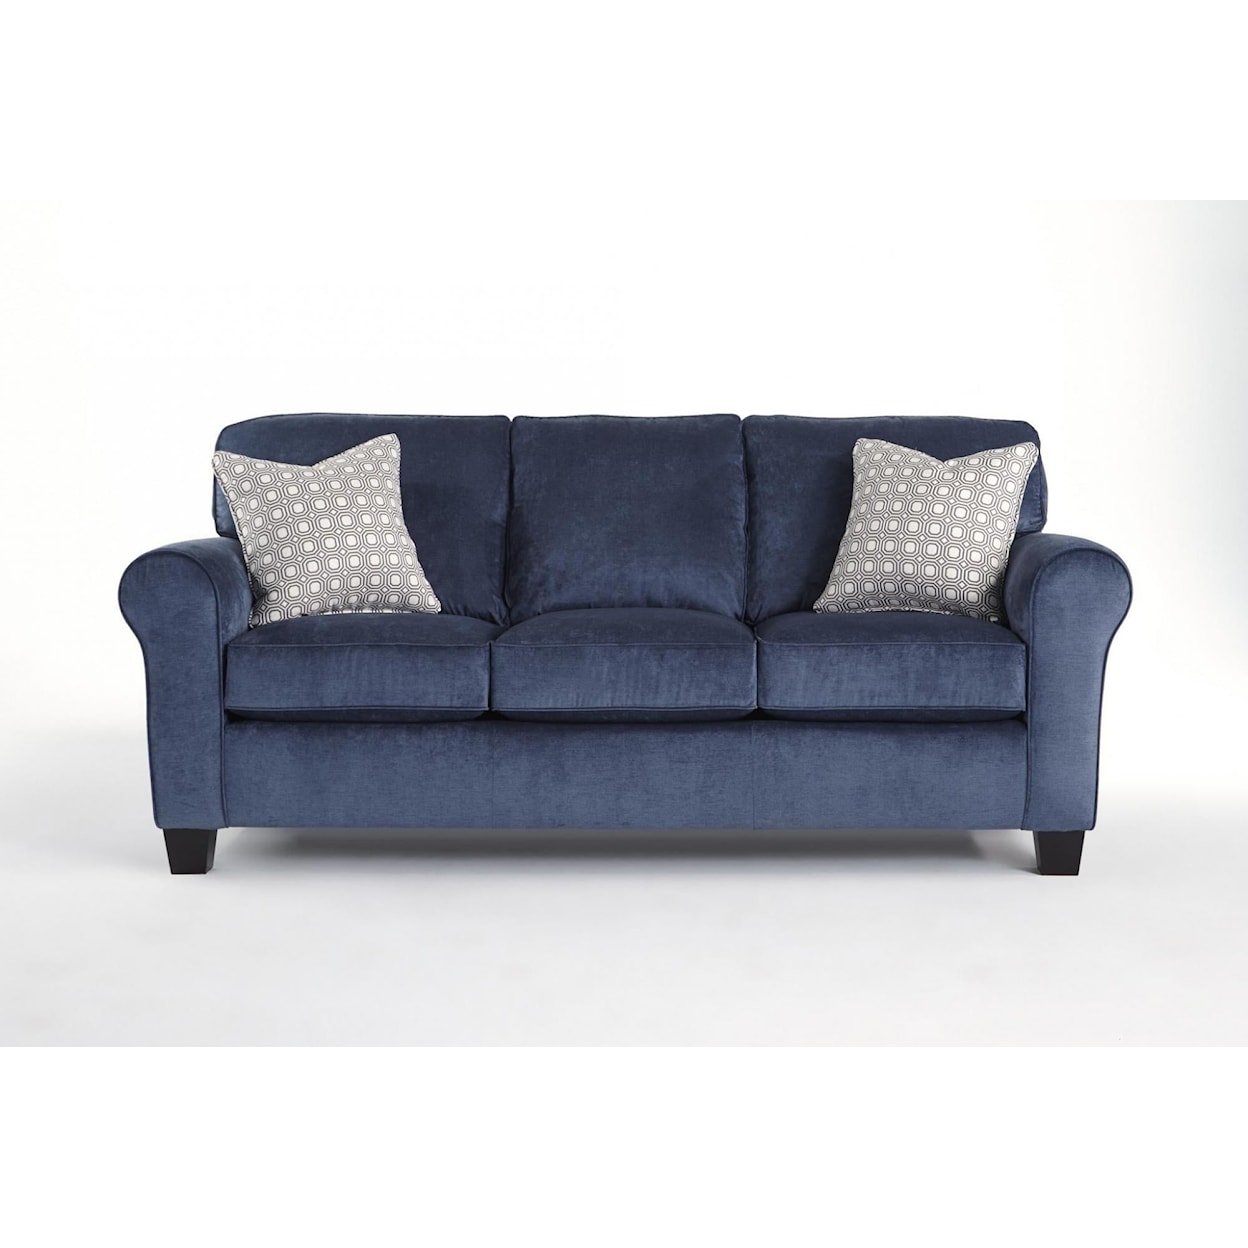 Bravo Furniture Annabel Sofa with Exposed Wooden Legs